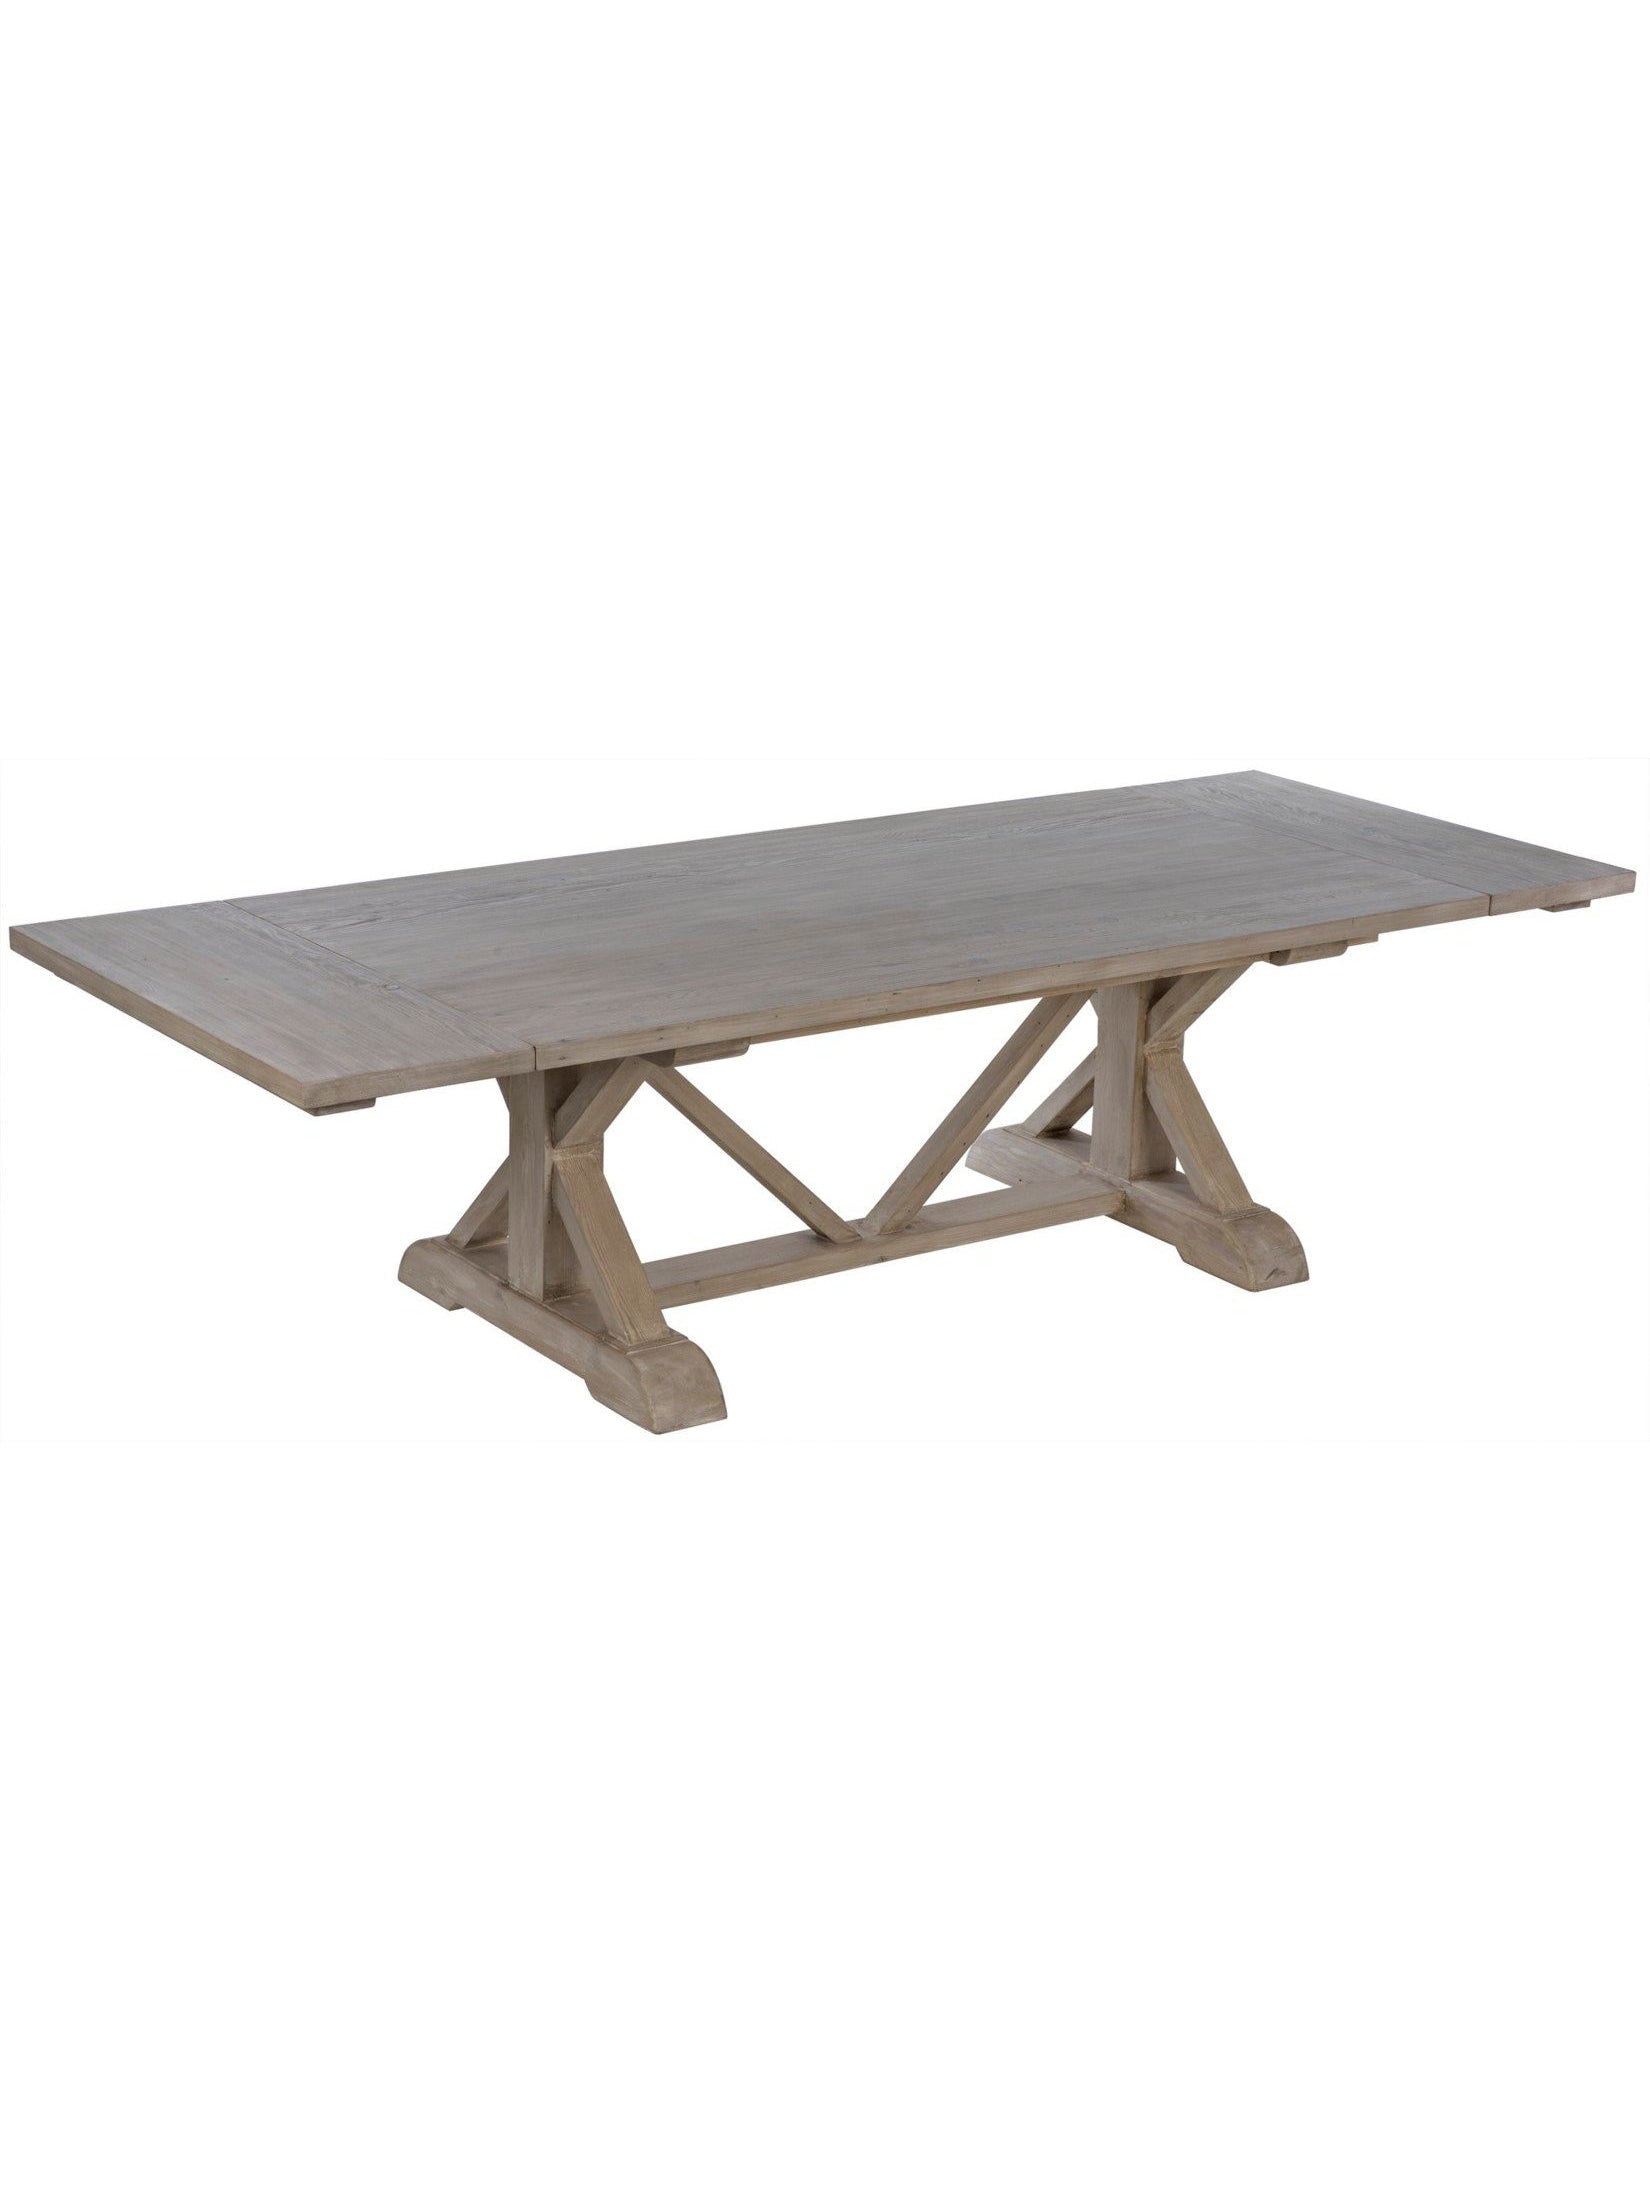 Cfc Furniture Rosario Extension Dining Table